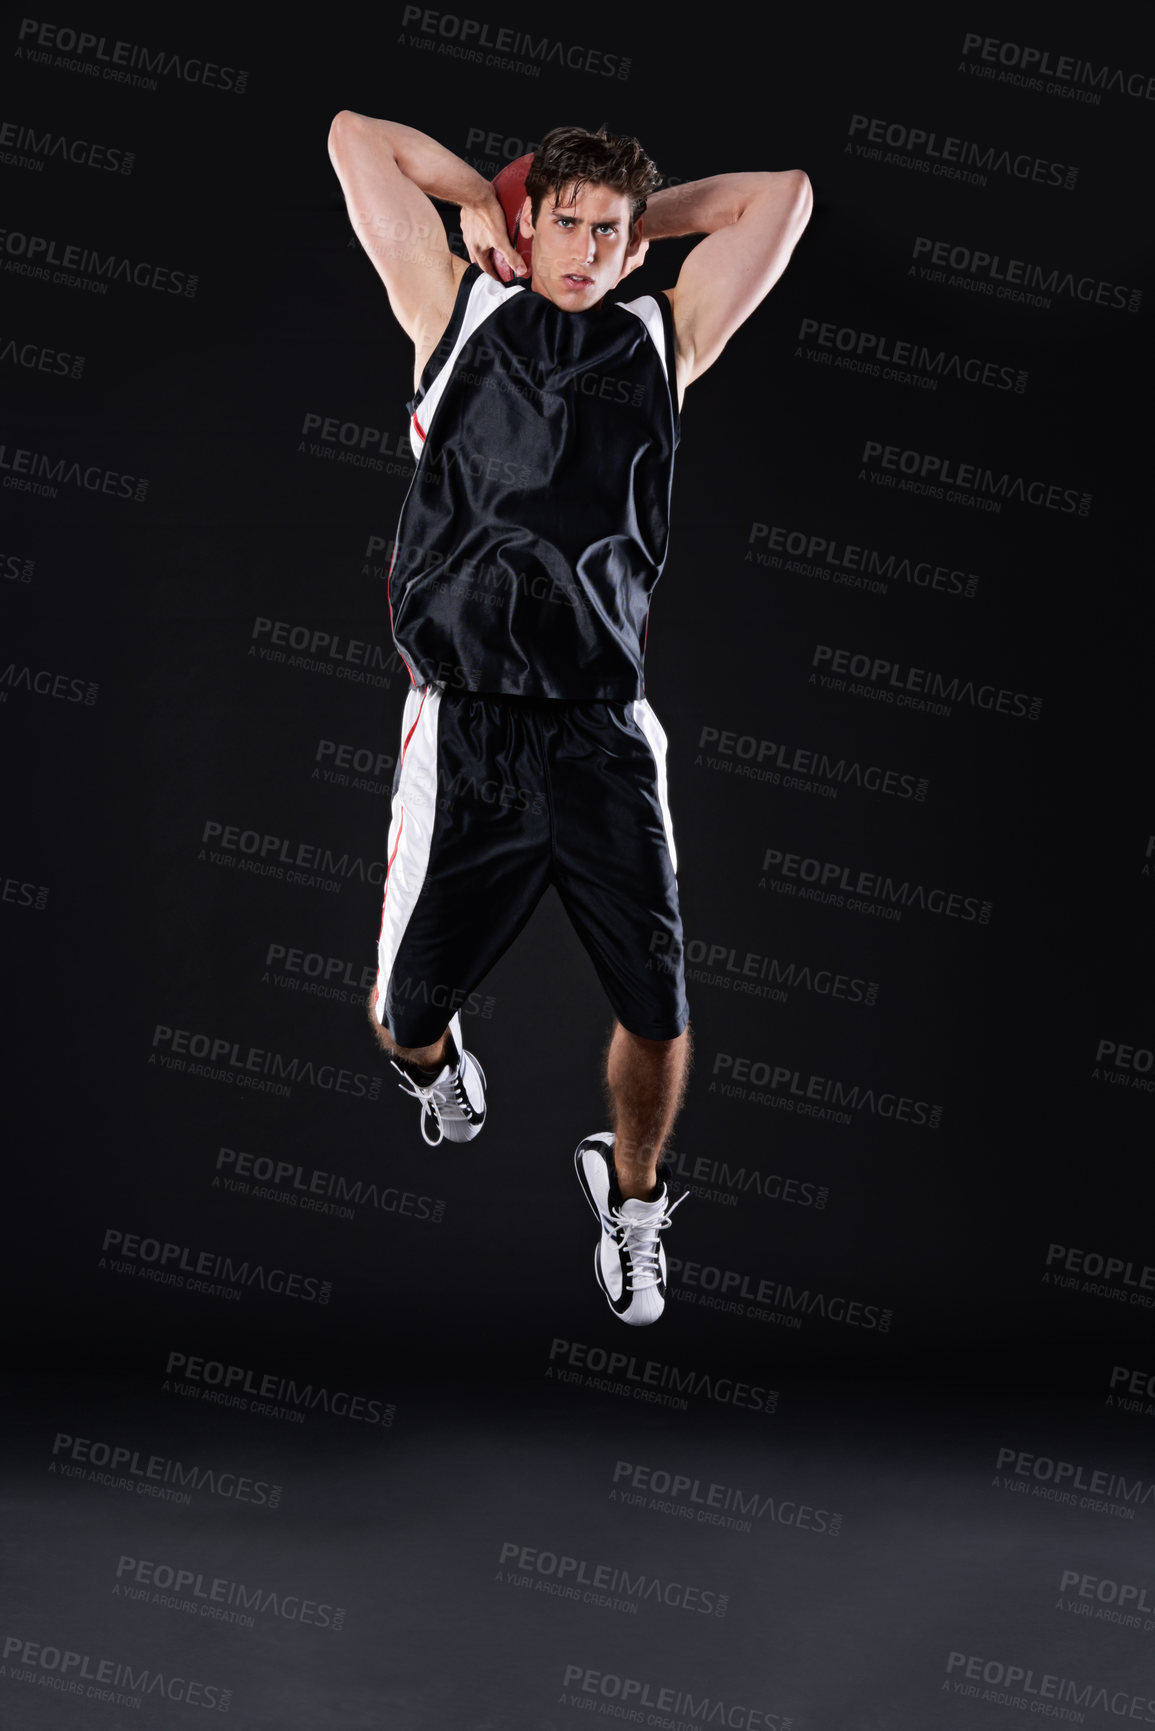 Buy stock photo Full length studio shot of a young male basketball player in action against a black background